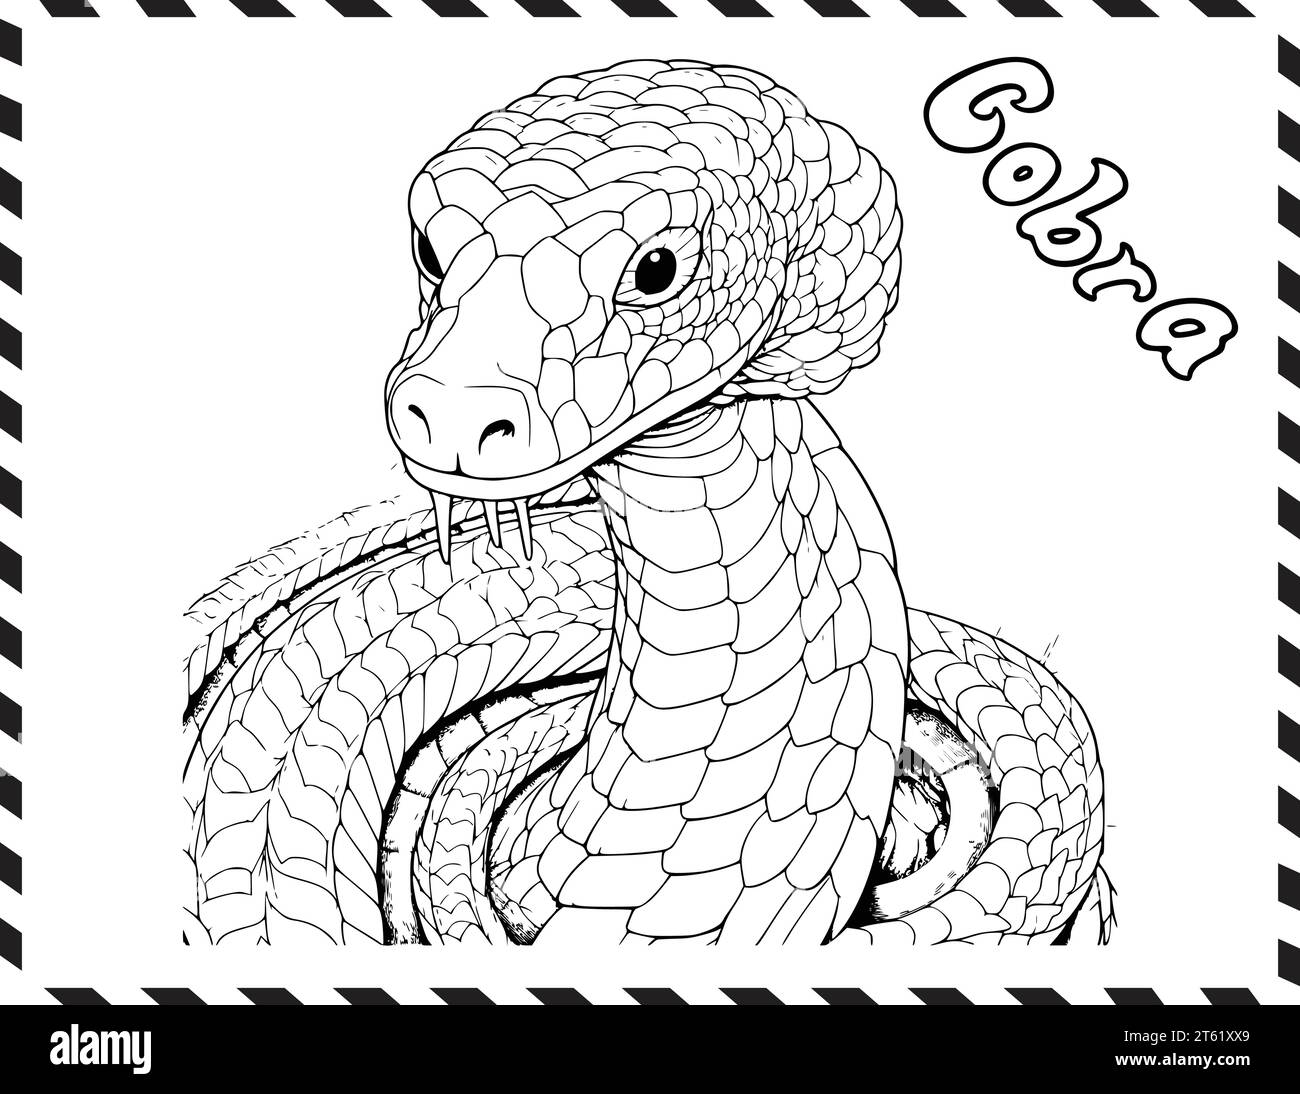 Cobra Coloring Page For Kids Stock Vector